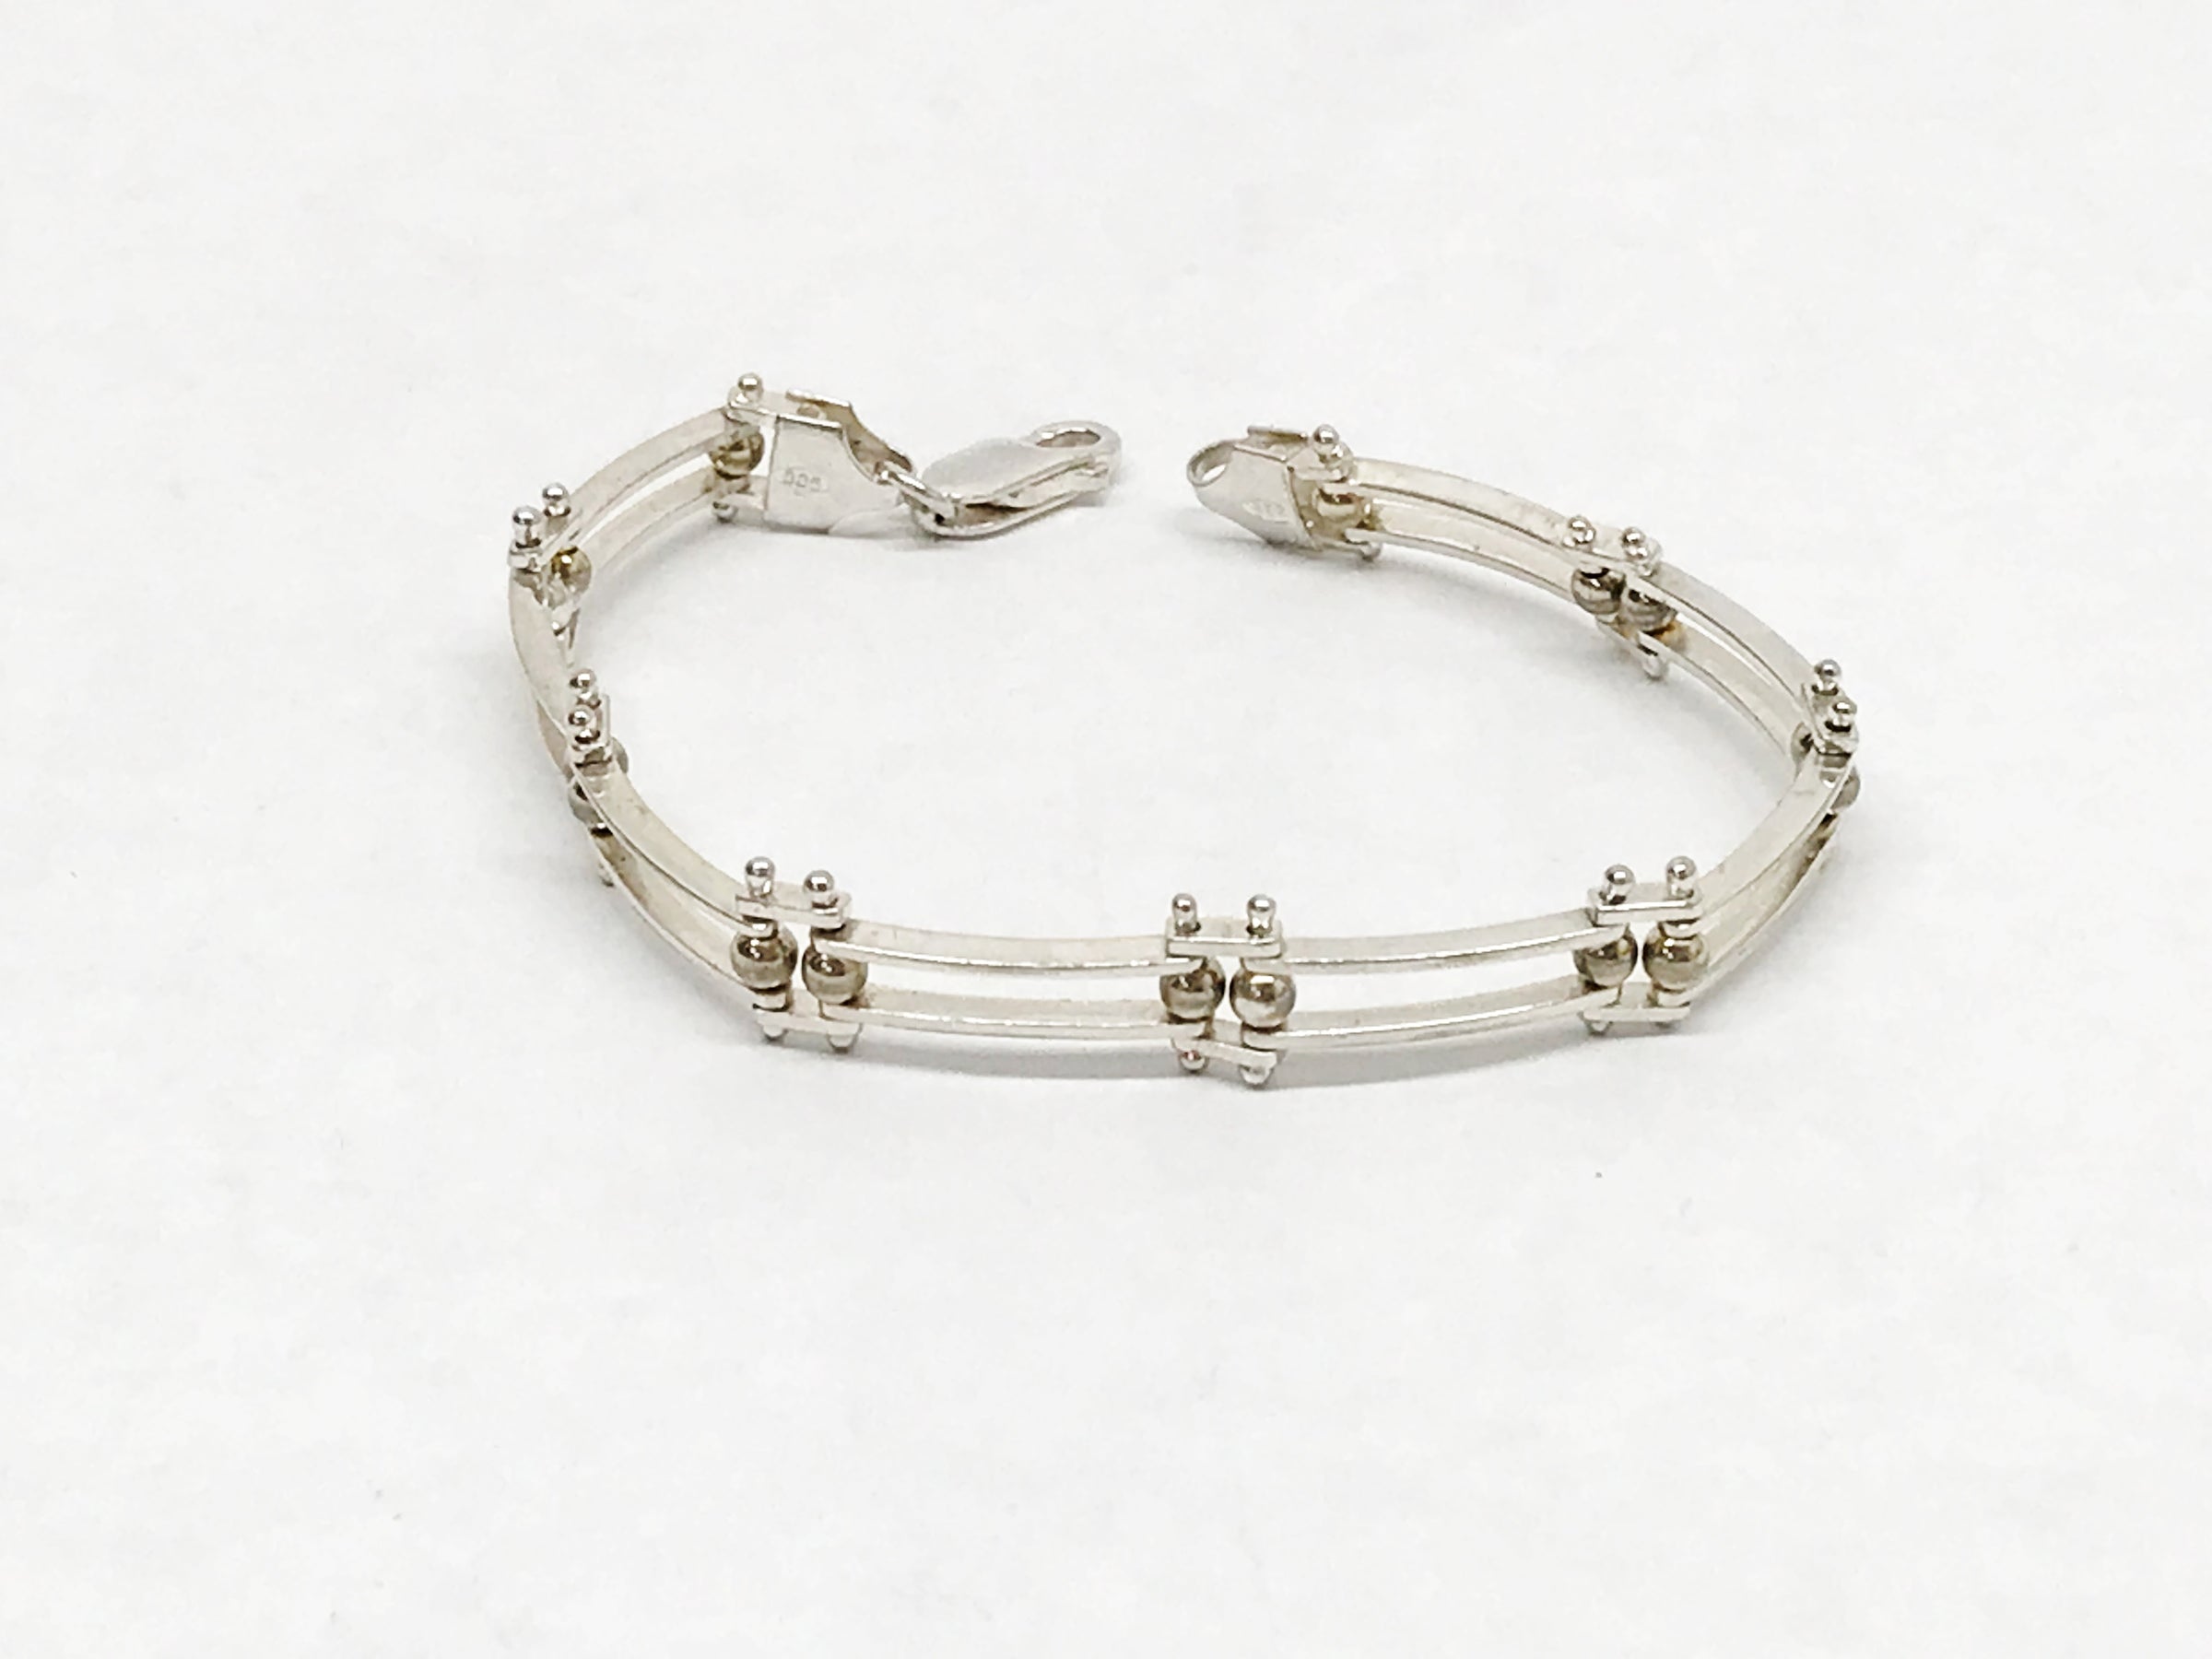 www.hersandhistreasures.com/products/double-bar-link-and-bead-925-sterling-silver-bracelet-italy